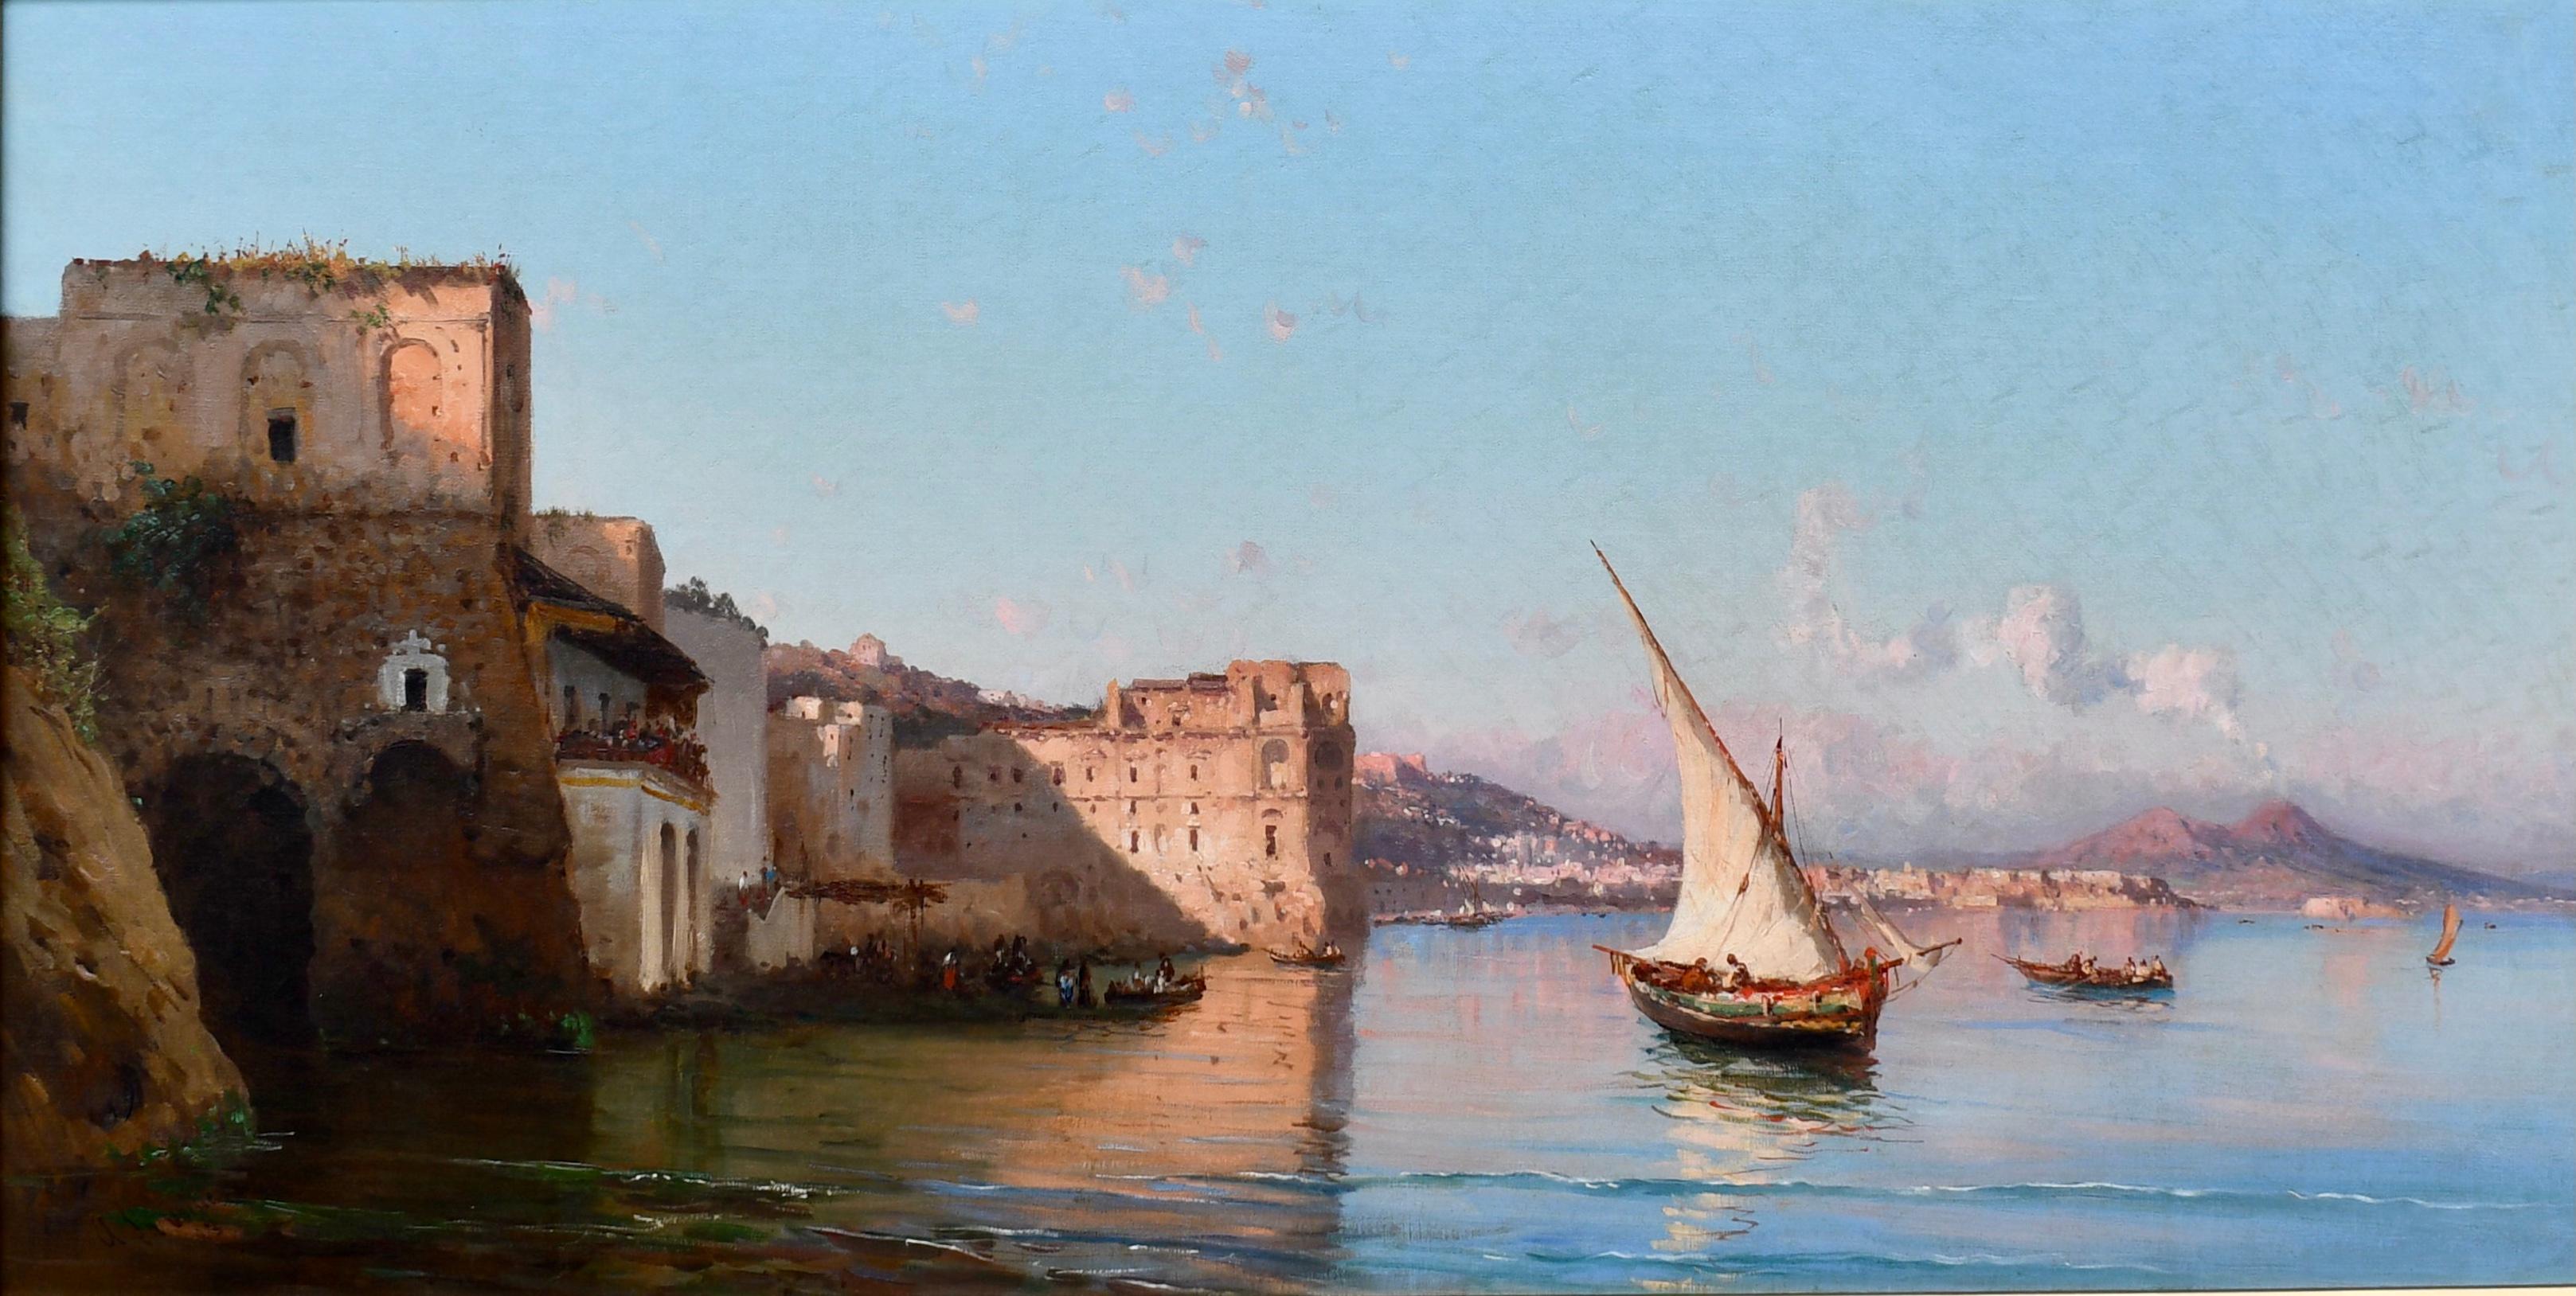 Oil on canvas, signed and dated lower left 1883.

Measurements:
Canvas: 20